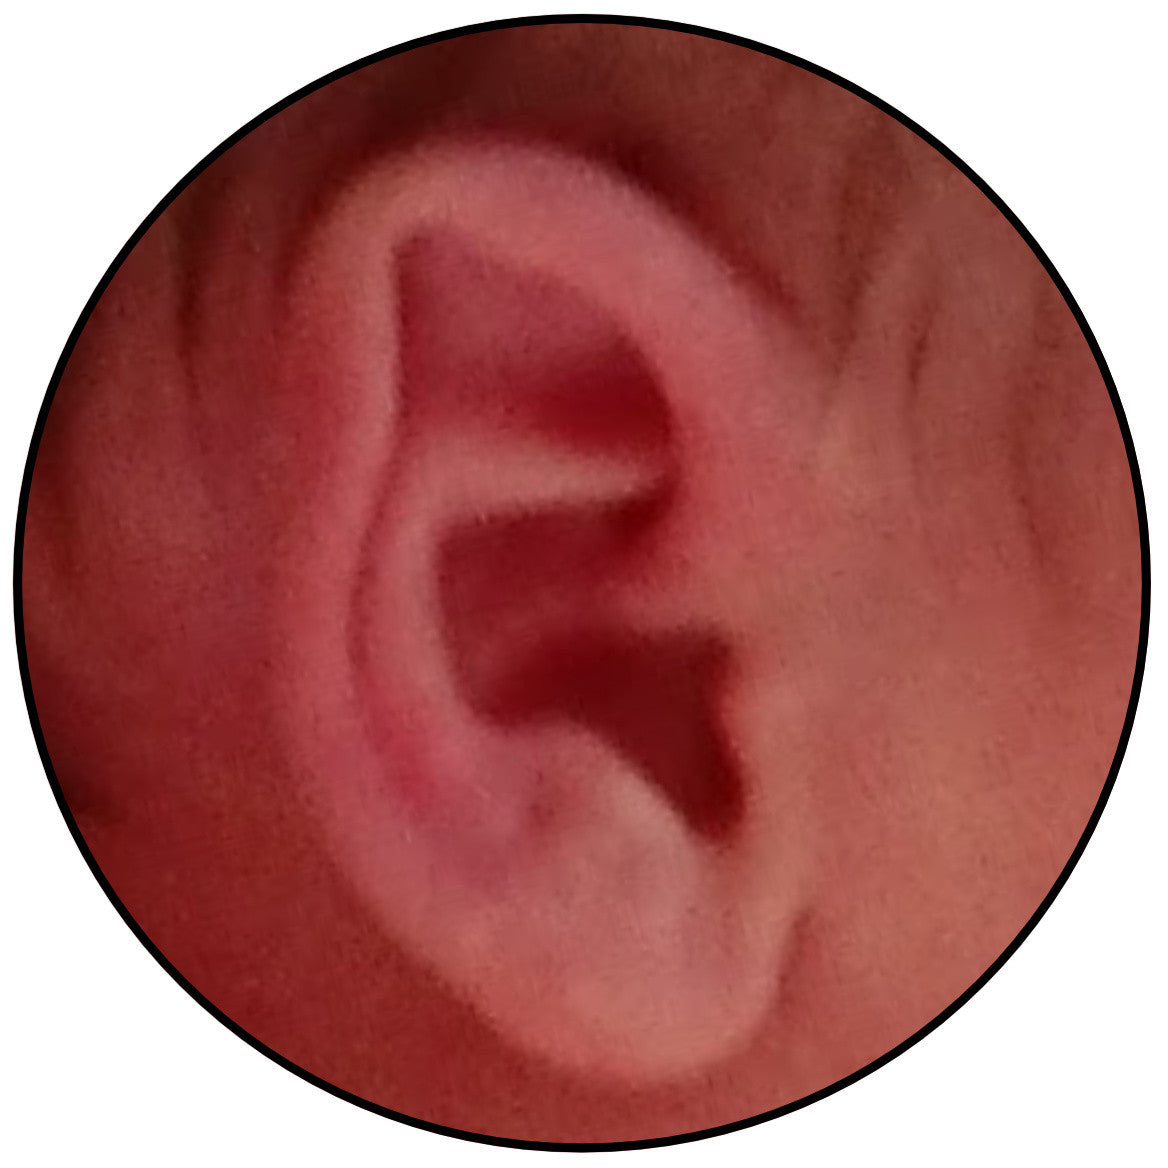 earbuddies results